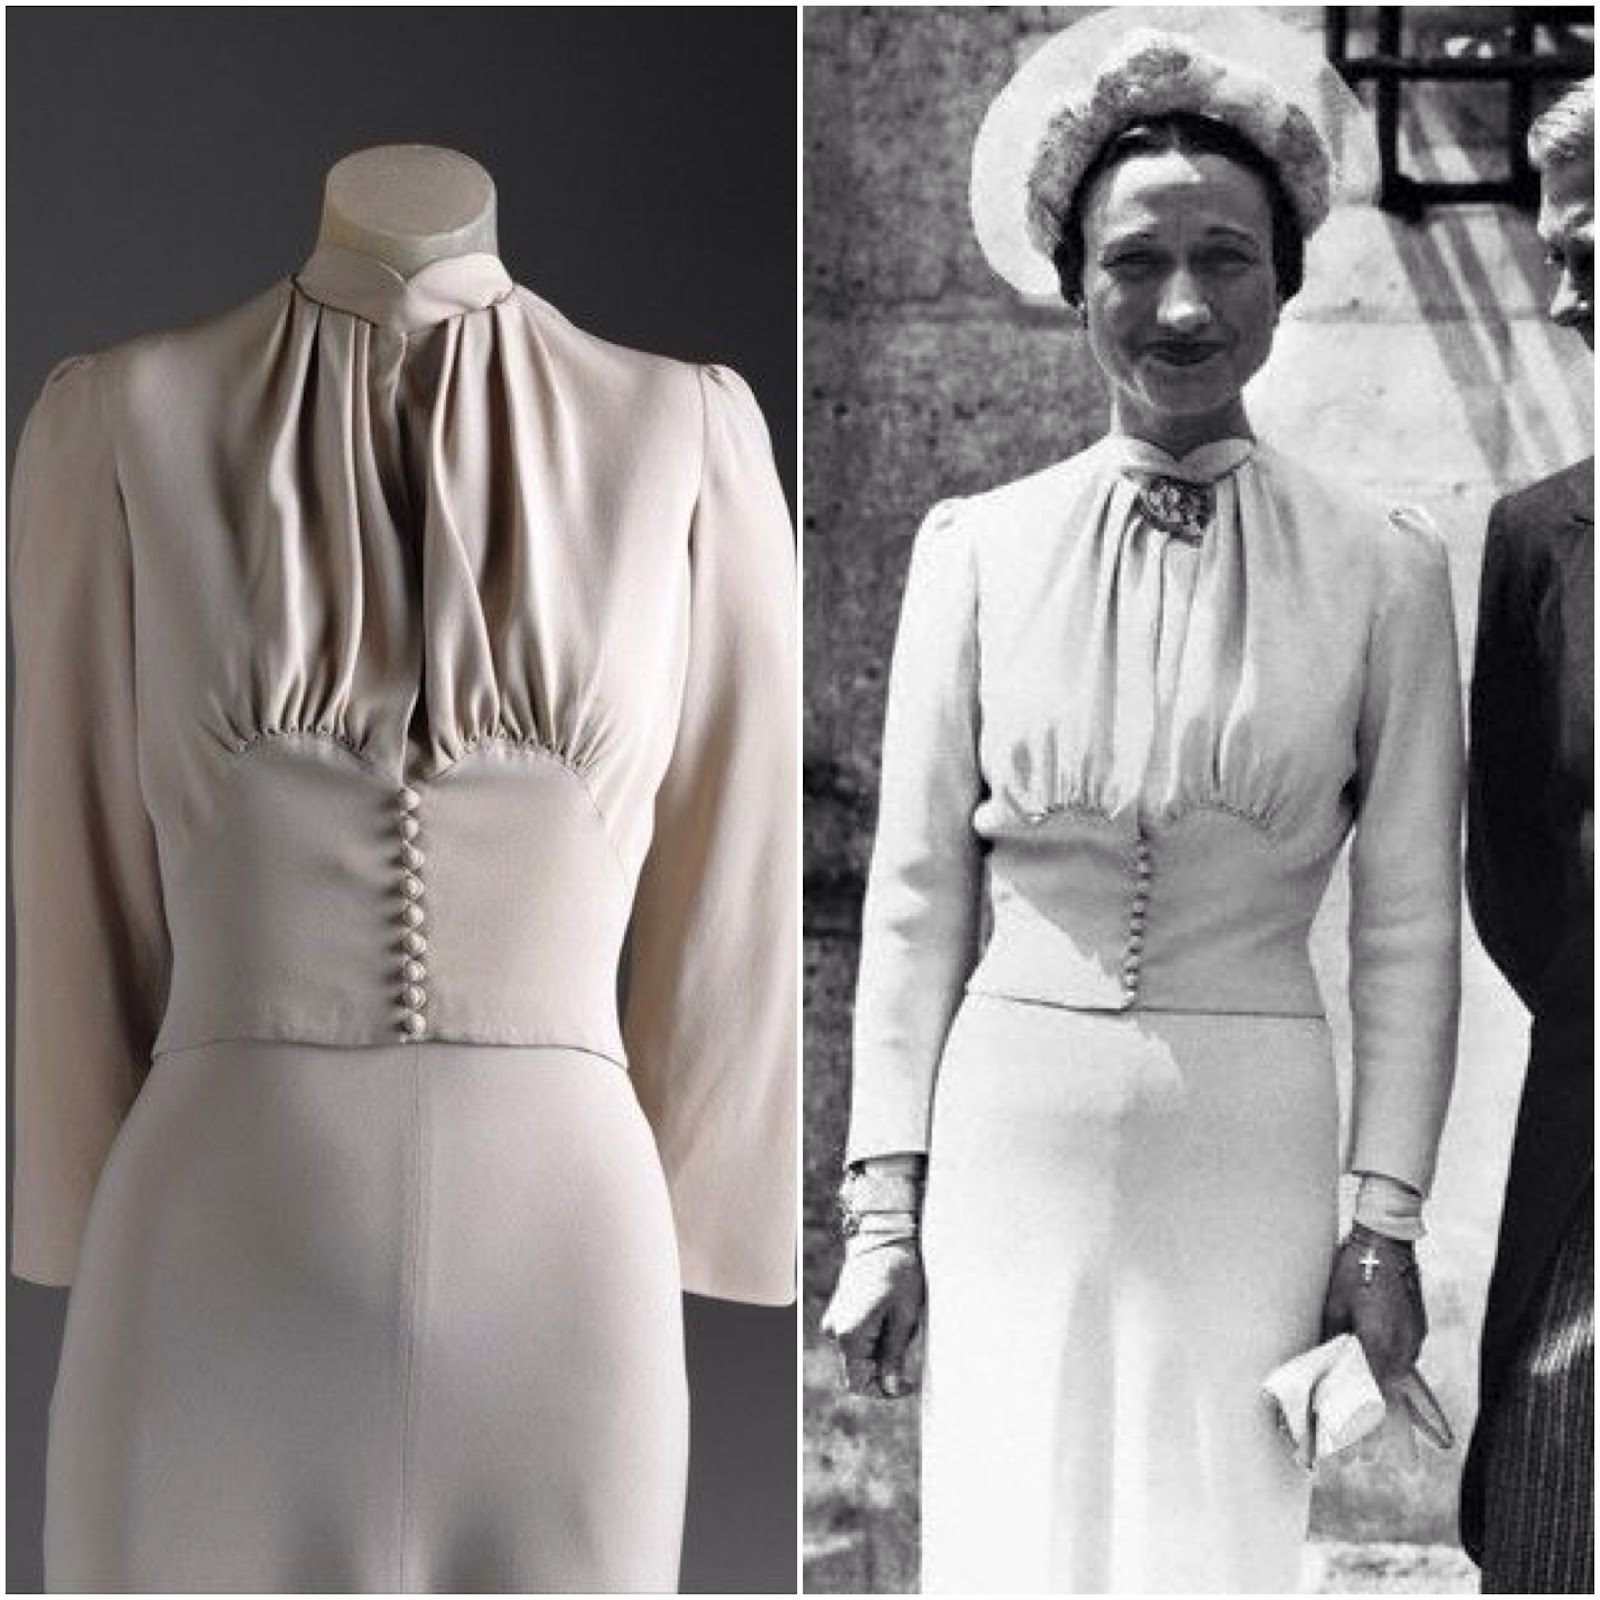 FrockWatch: 1930s Innovators: Mainbocher and Coco Chanel